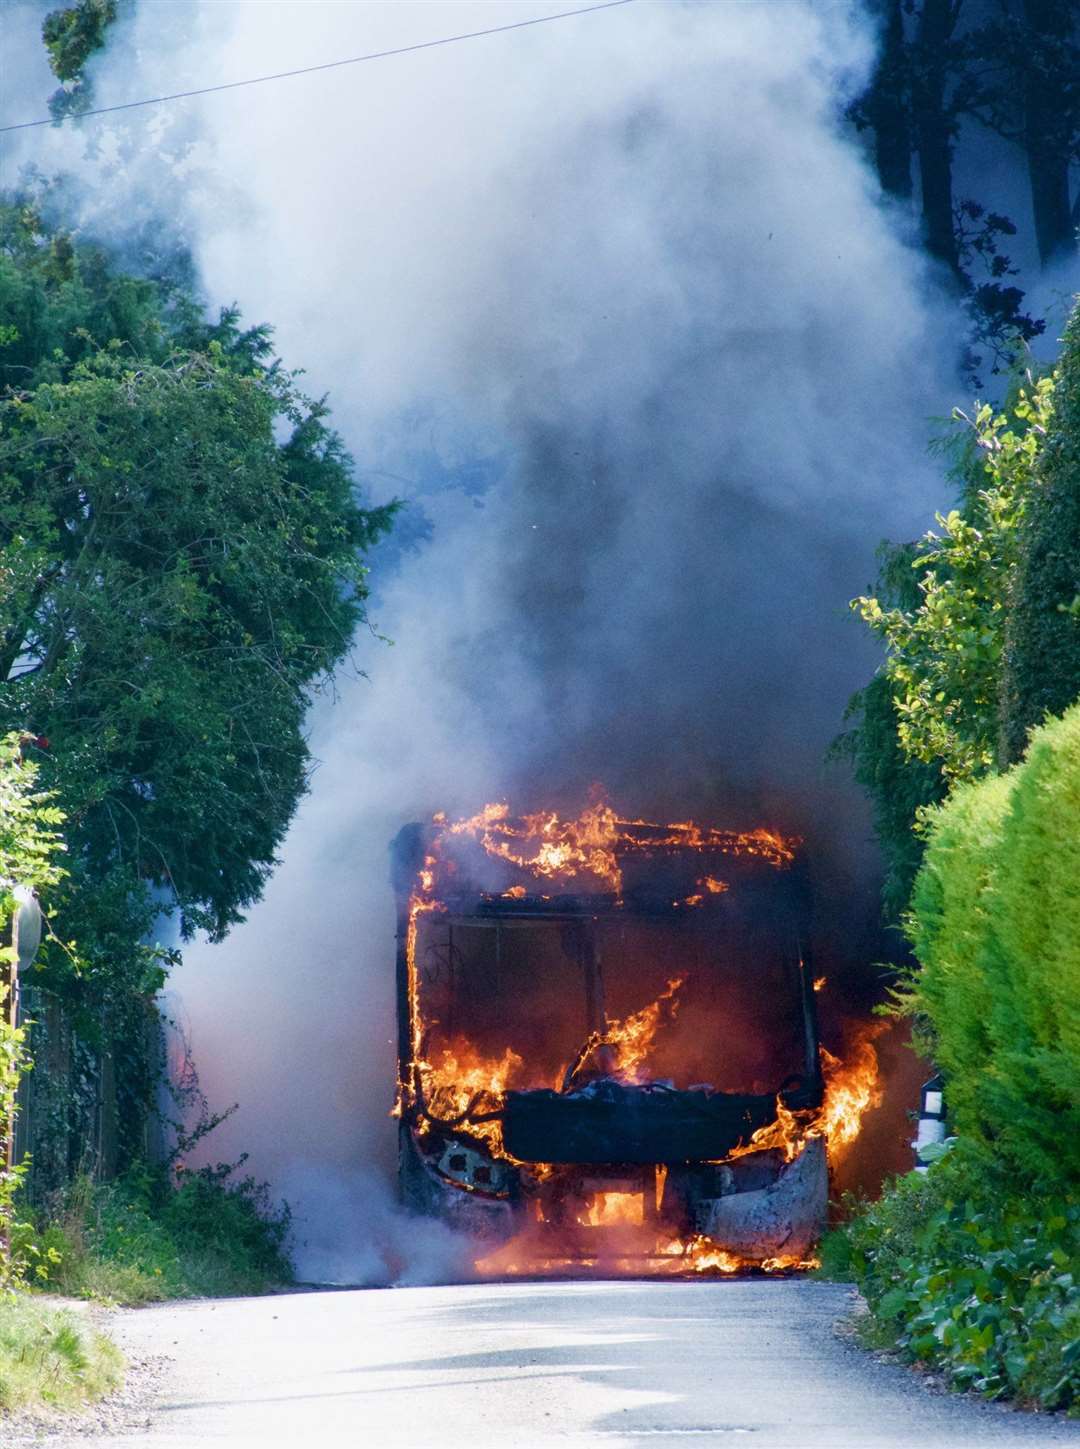 Smoke fills the narrow lane where the bus was forced to stop. Picture: UKNiP